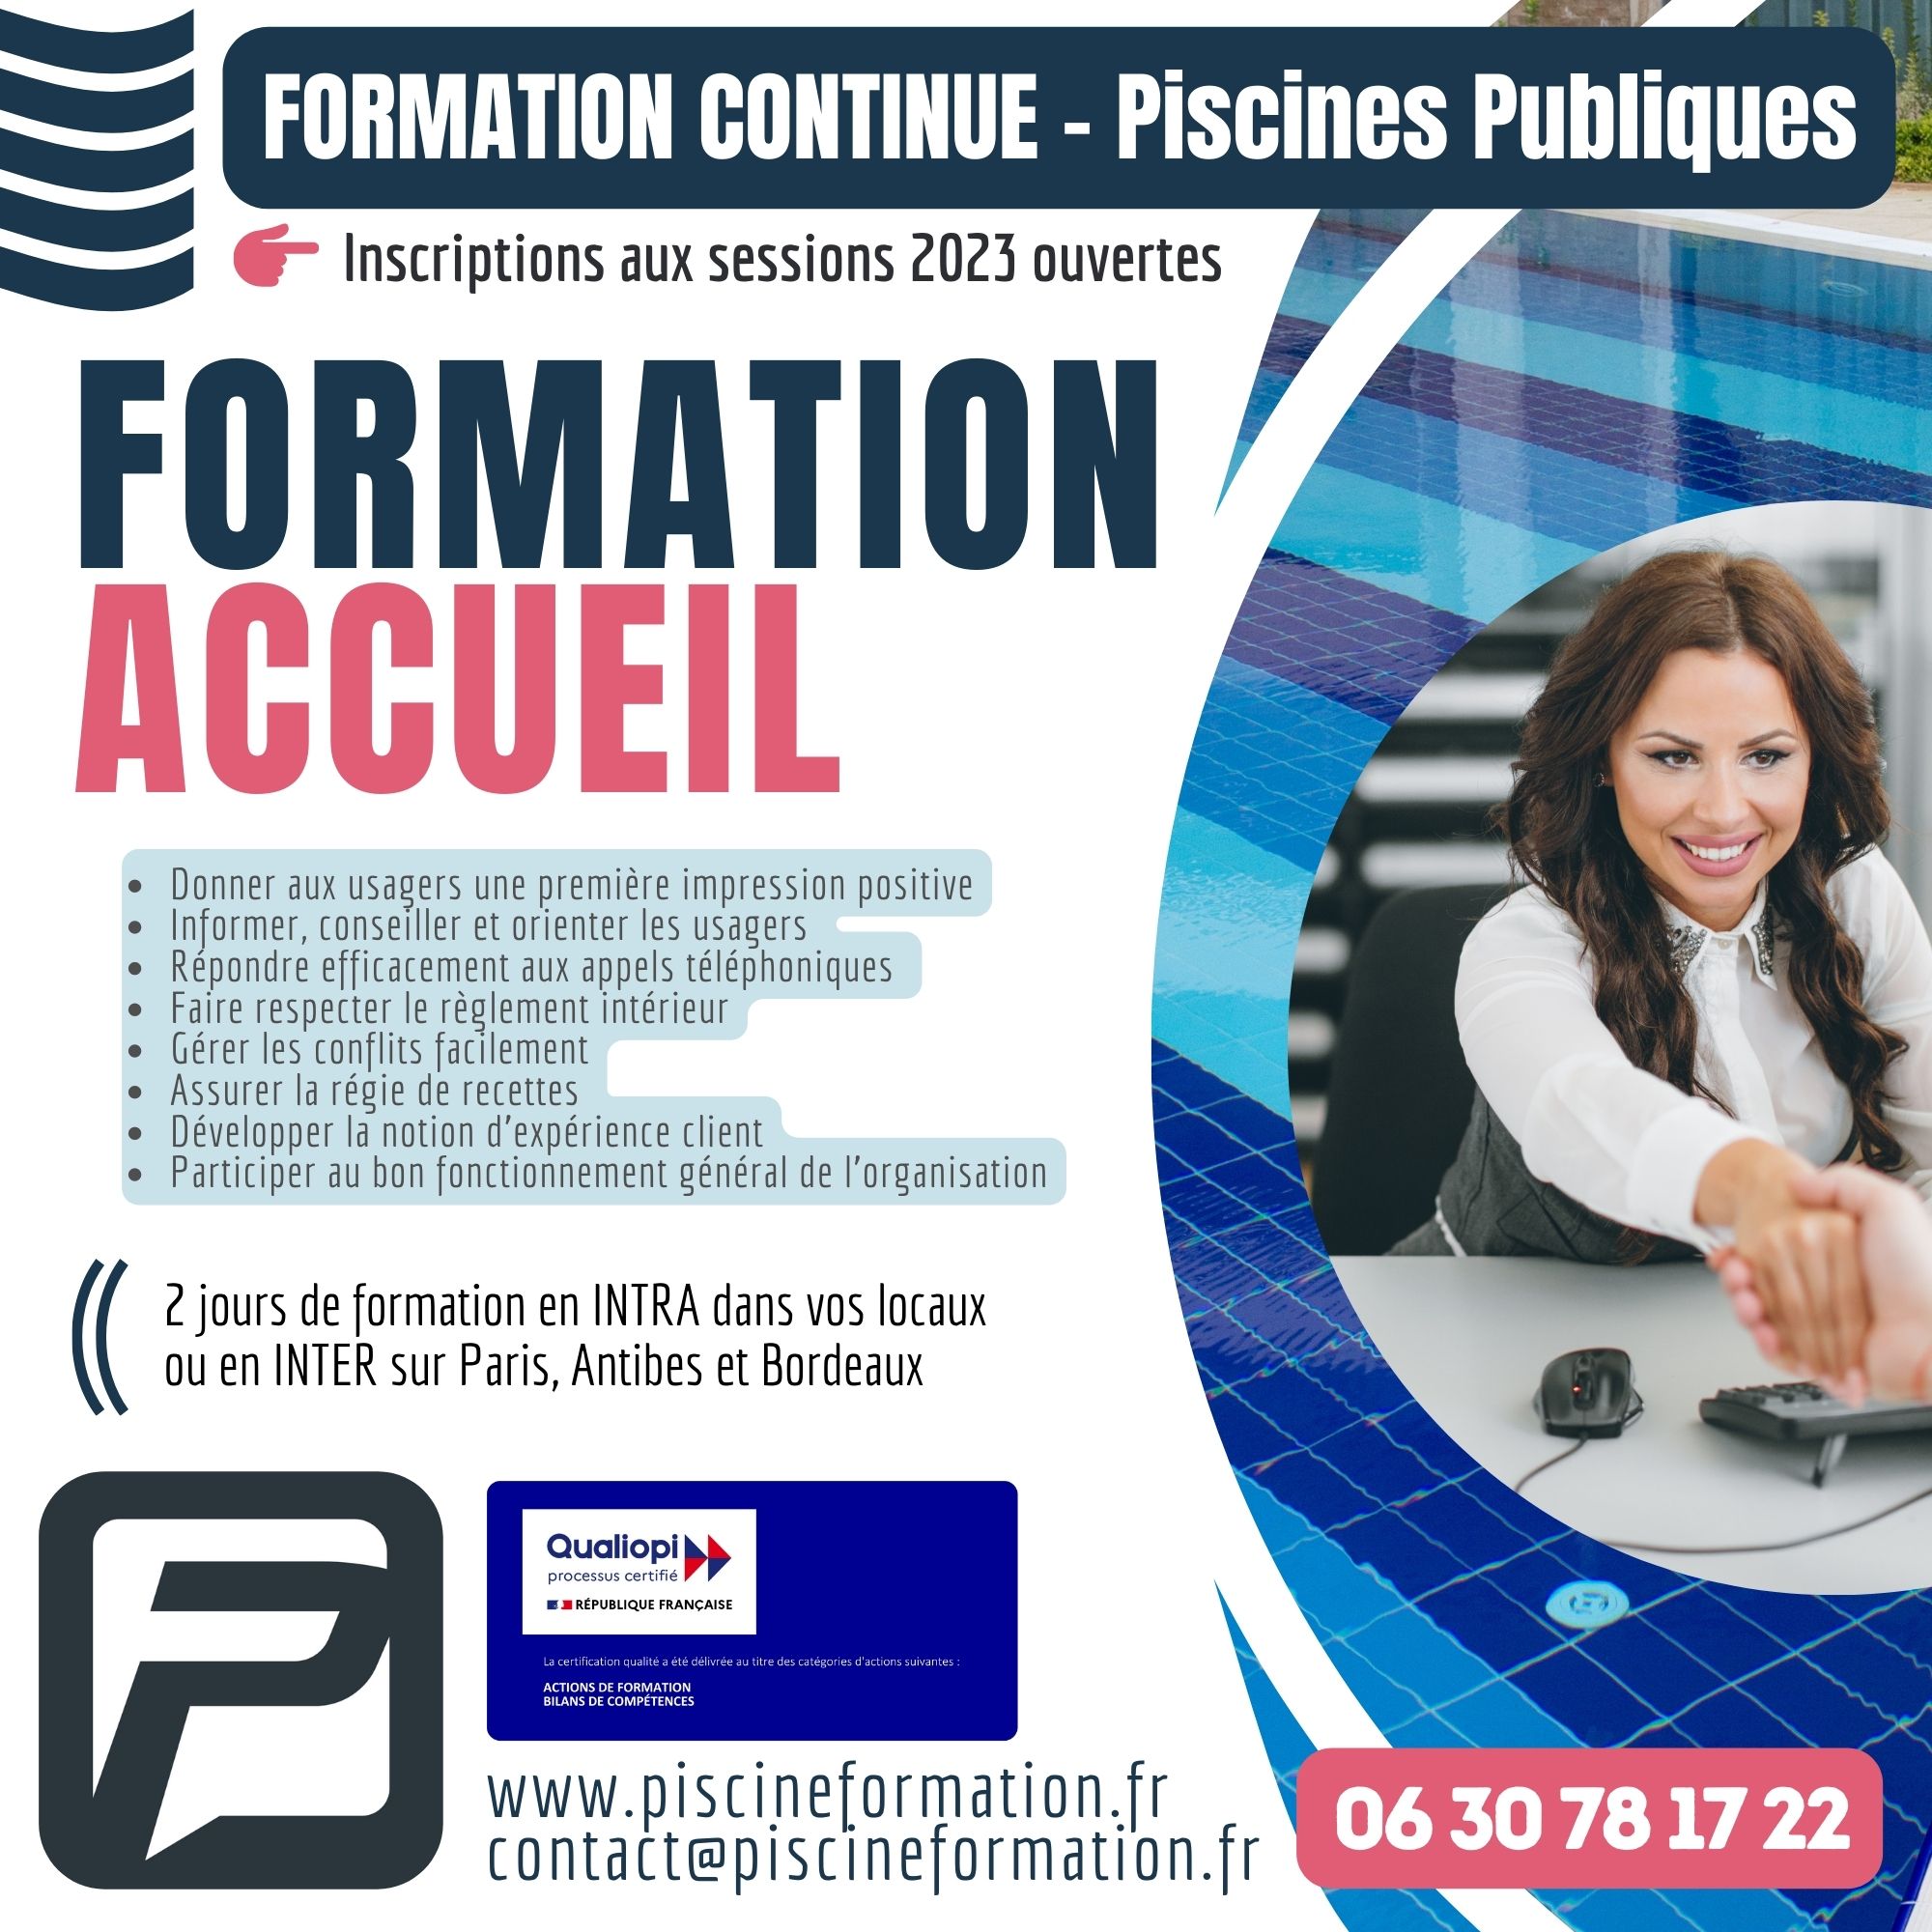 Formation Accueil